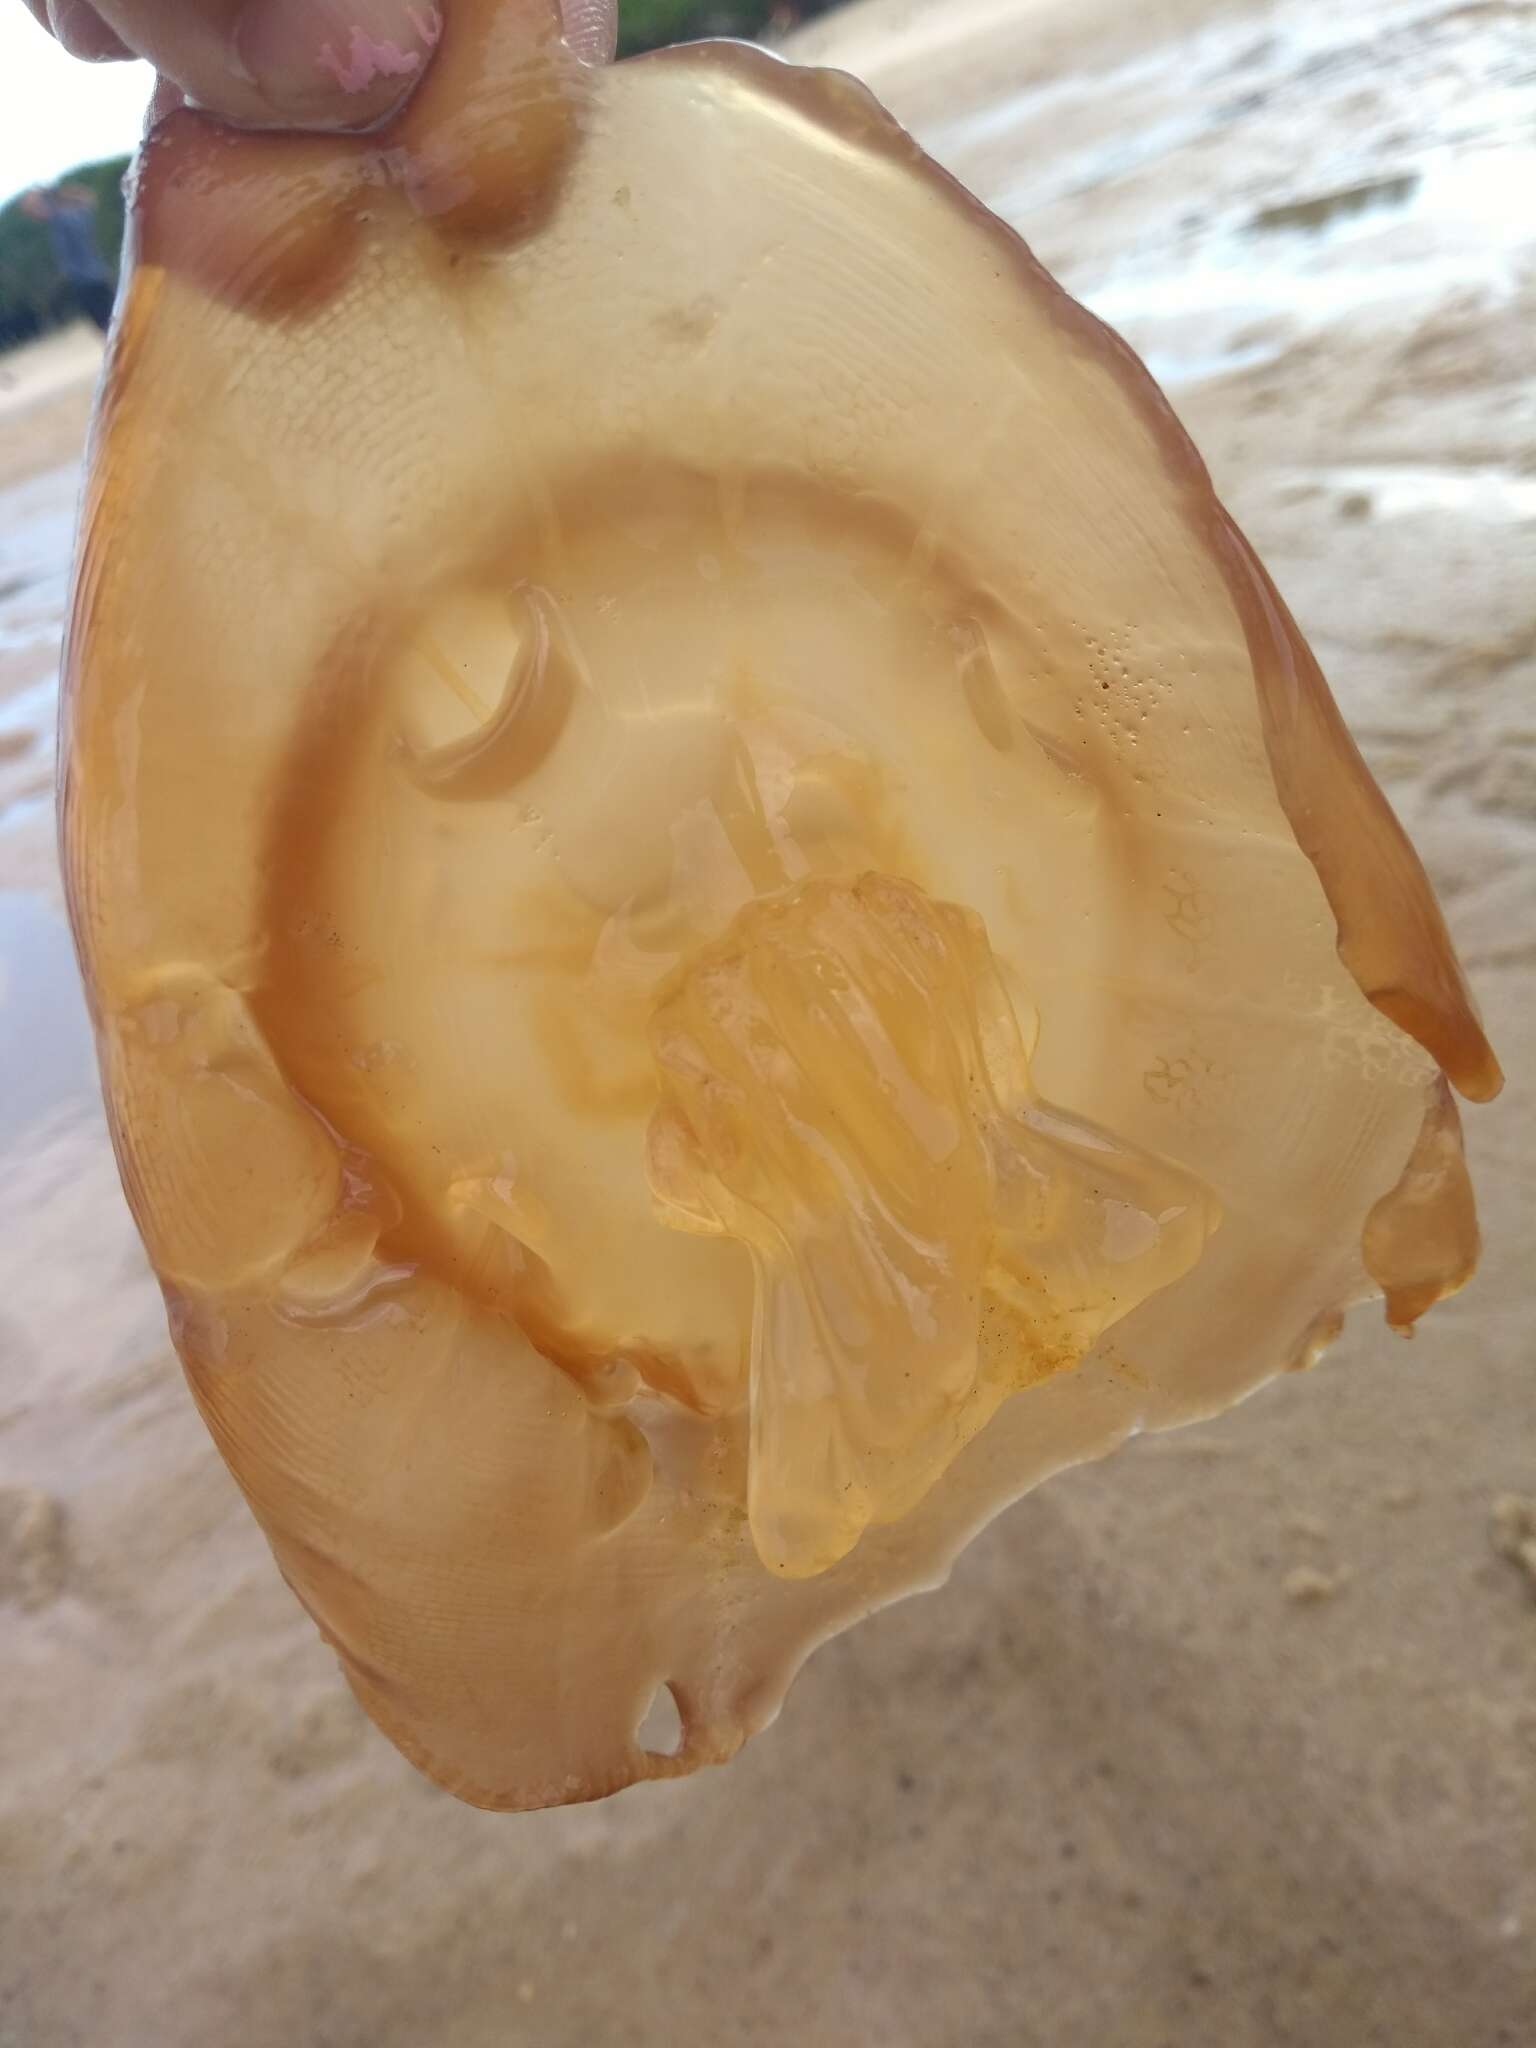 Image of cannonball jelly